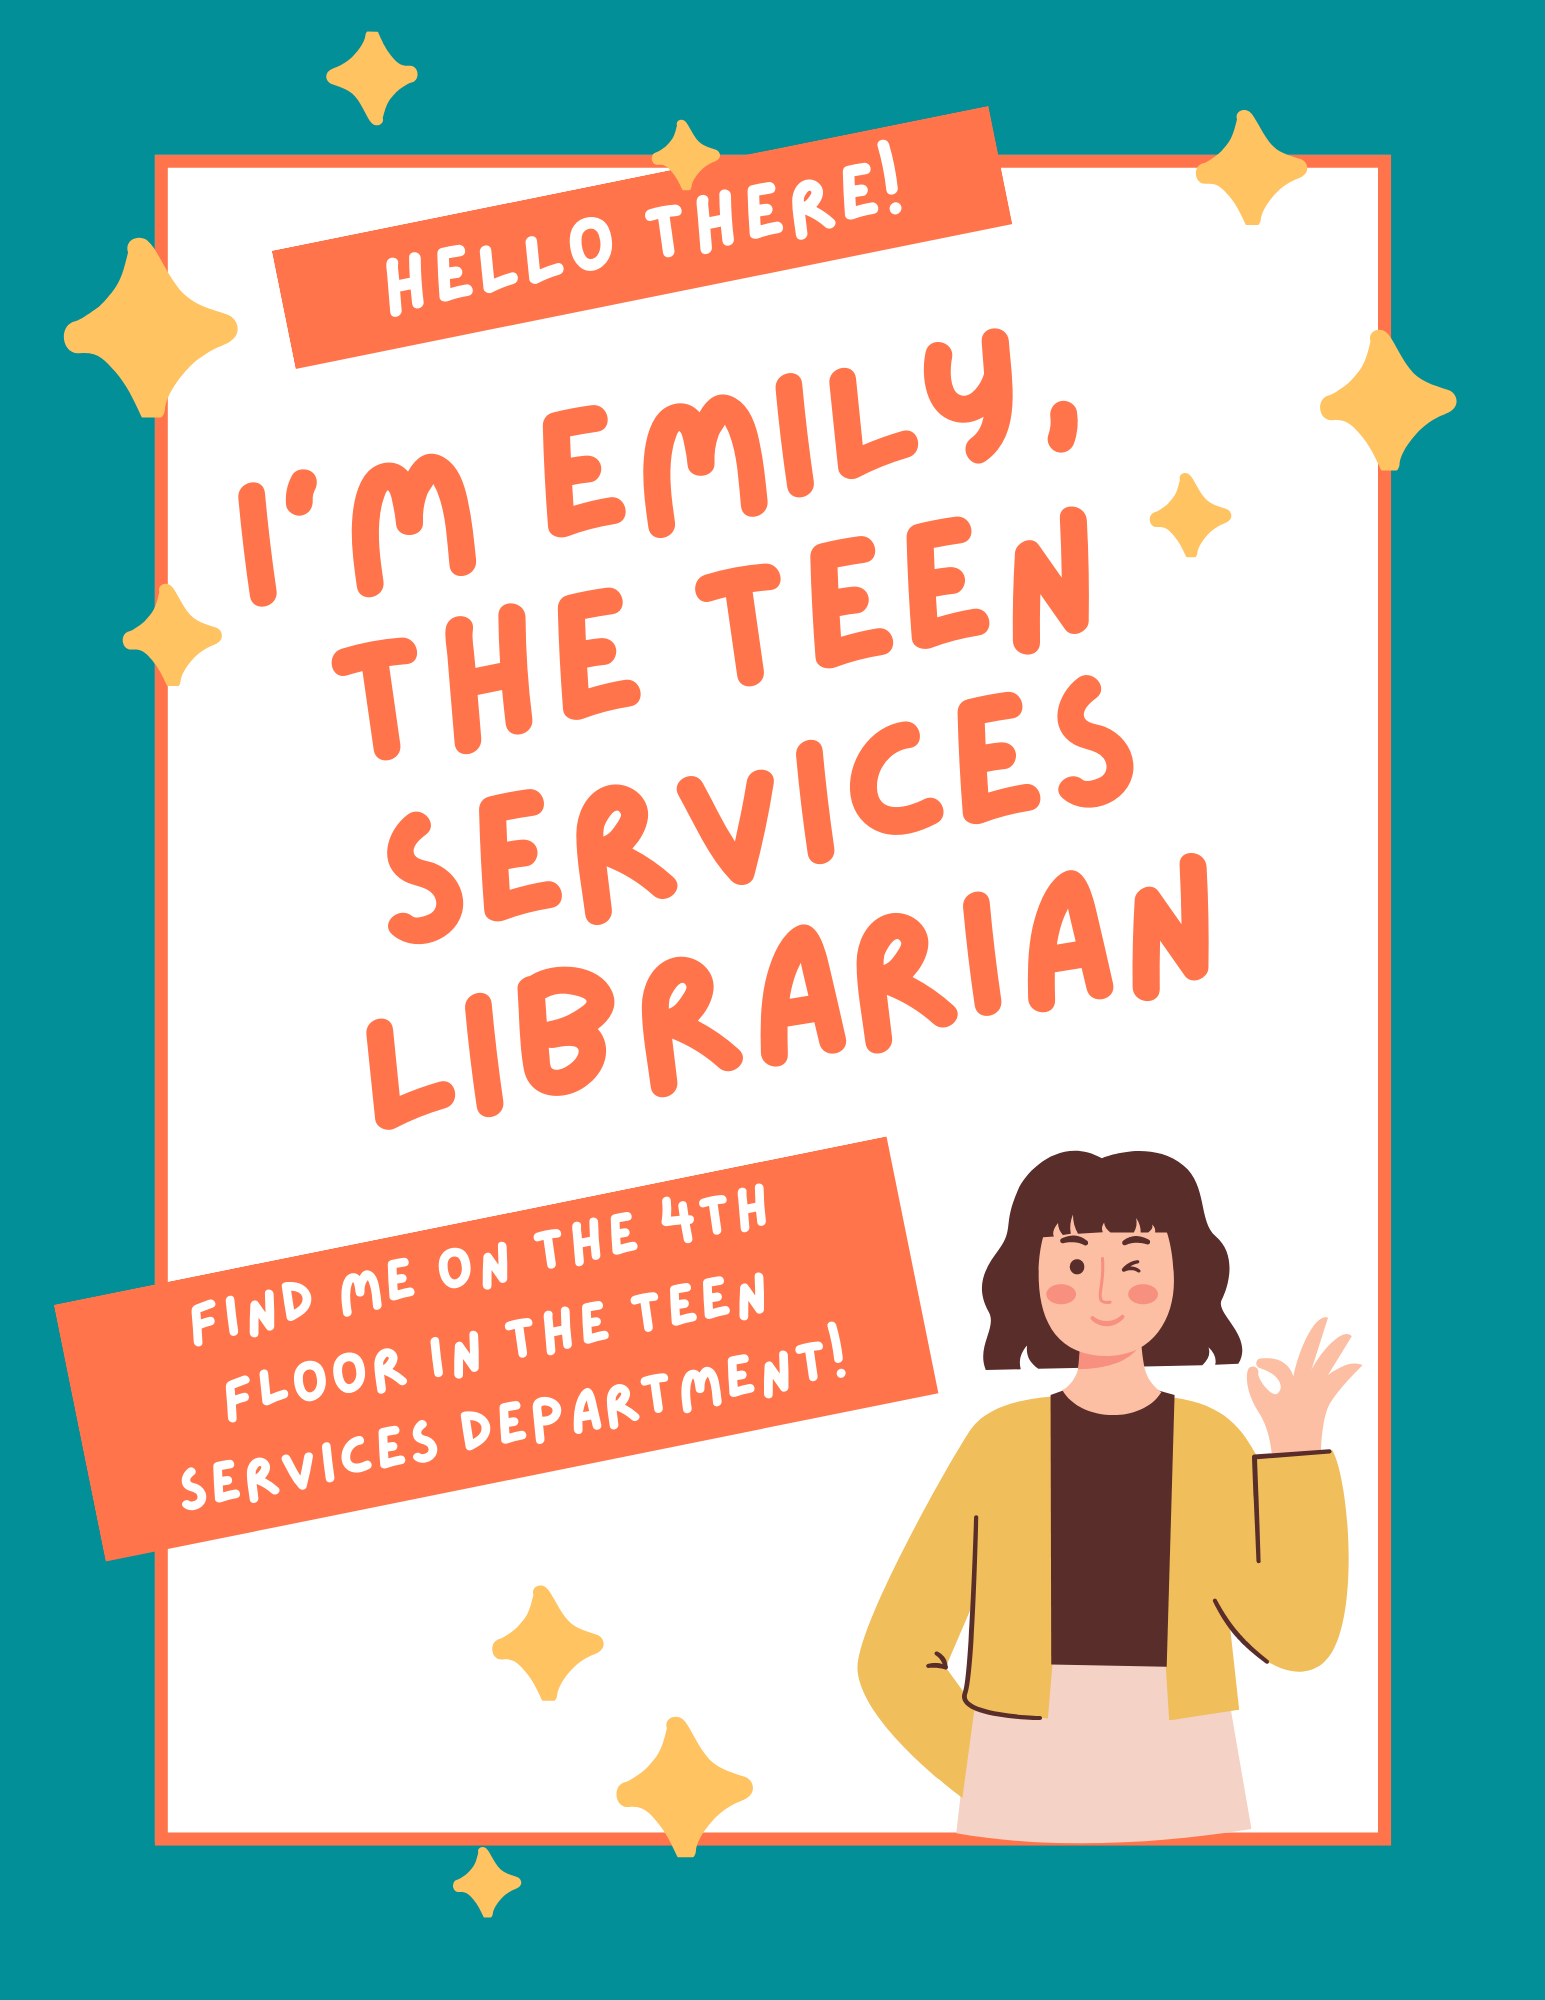 Hello there! I'm Emily, the Teen Services Librarian. Find me on the fourth floor in the teen services department.